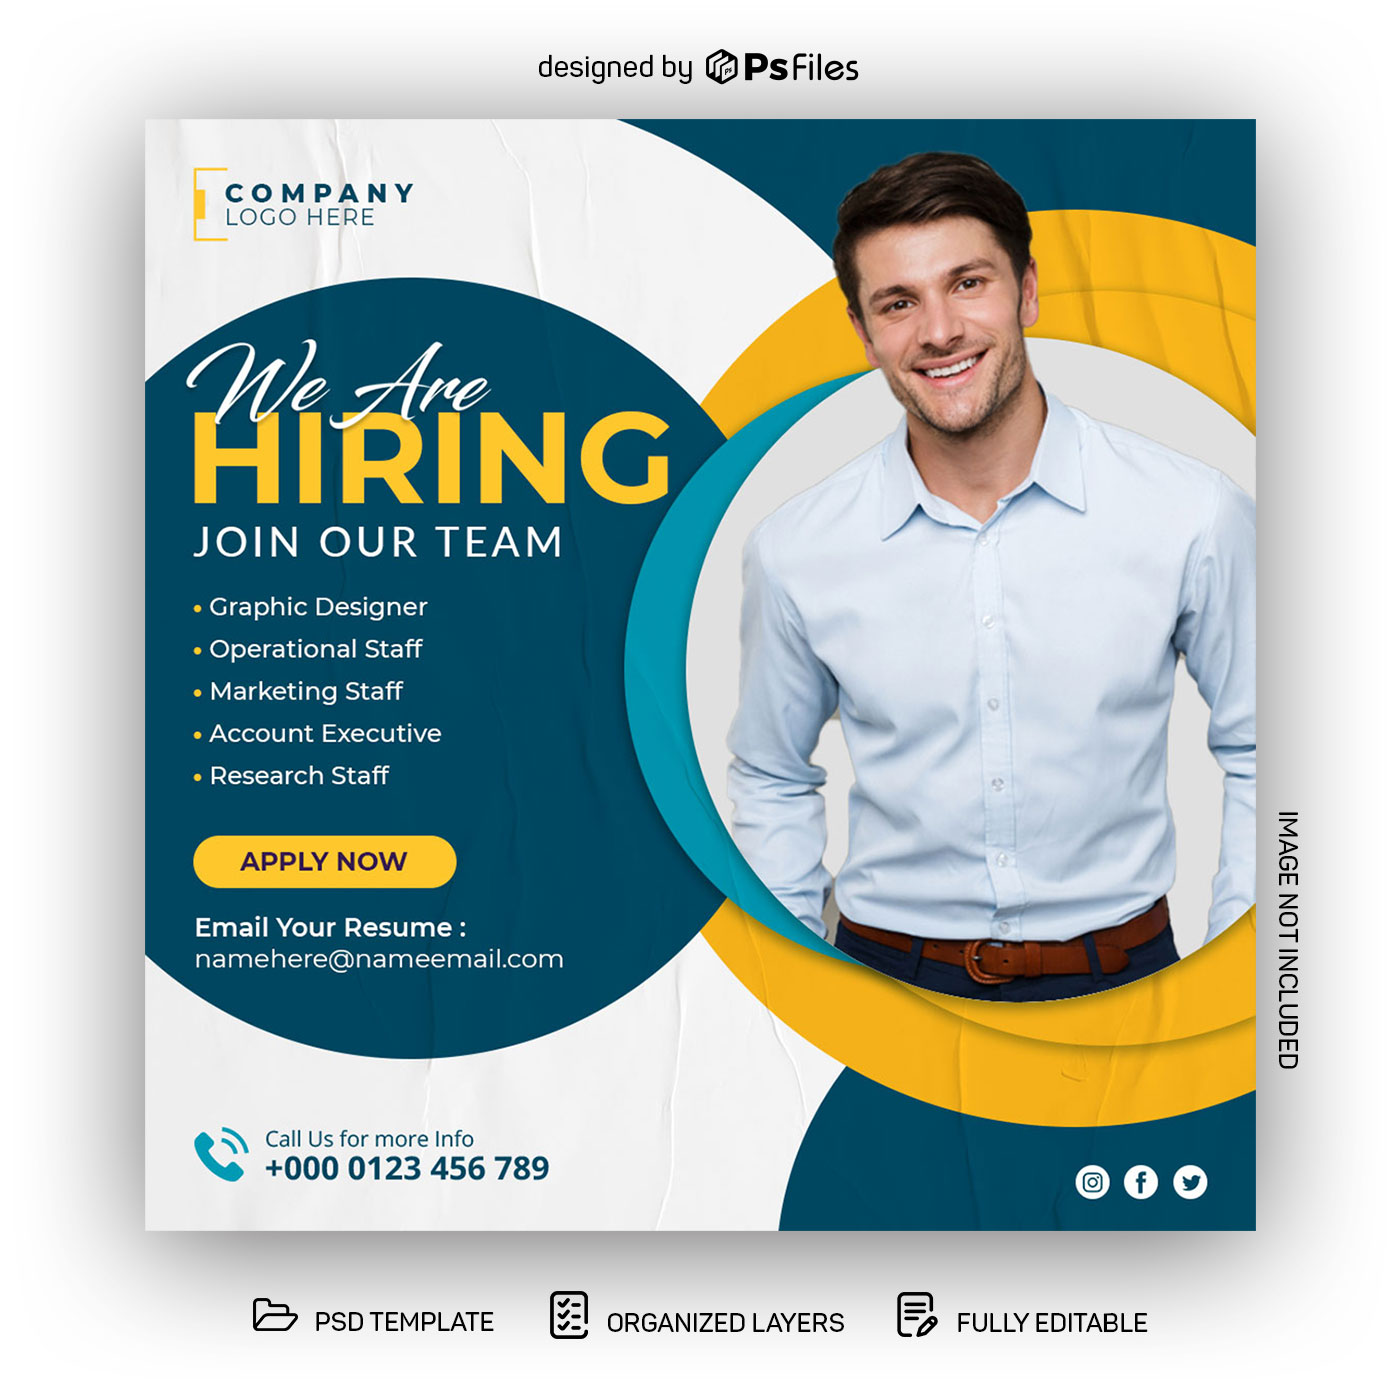 Job Vacancy Template Photos and Images